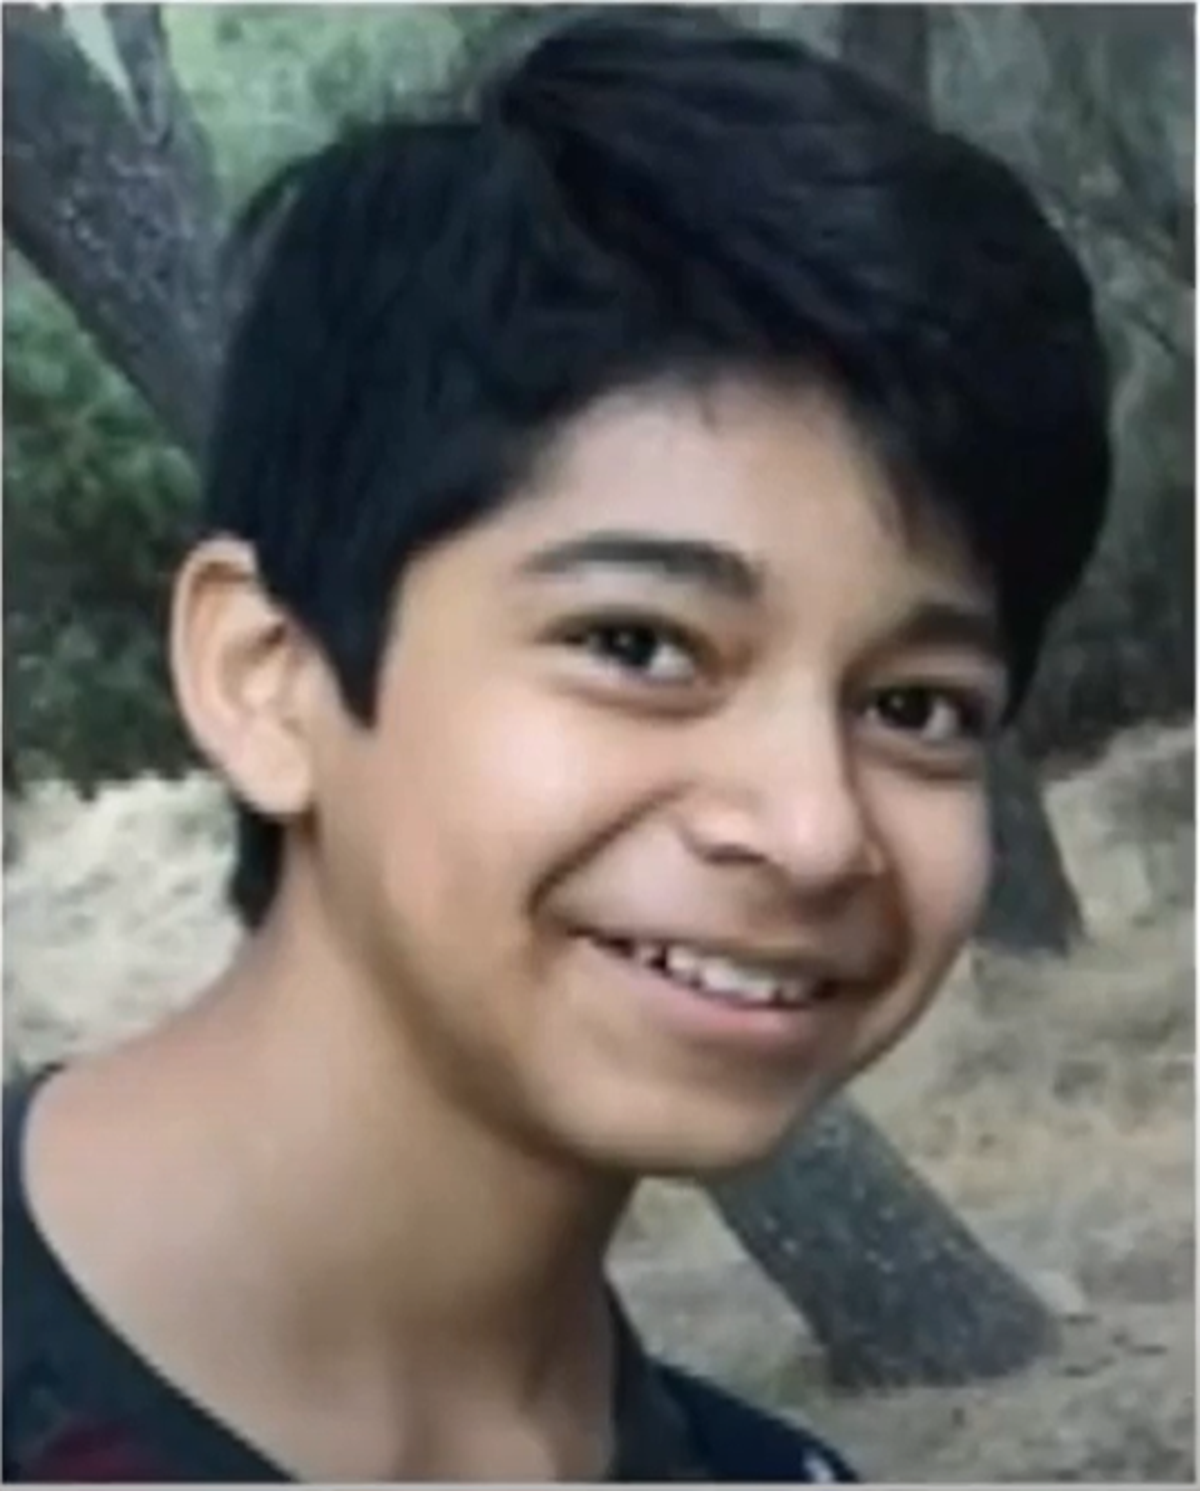 California school district reaches record $27m settlement after teen’s bullying death